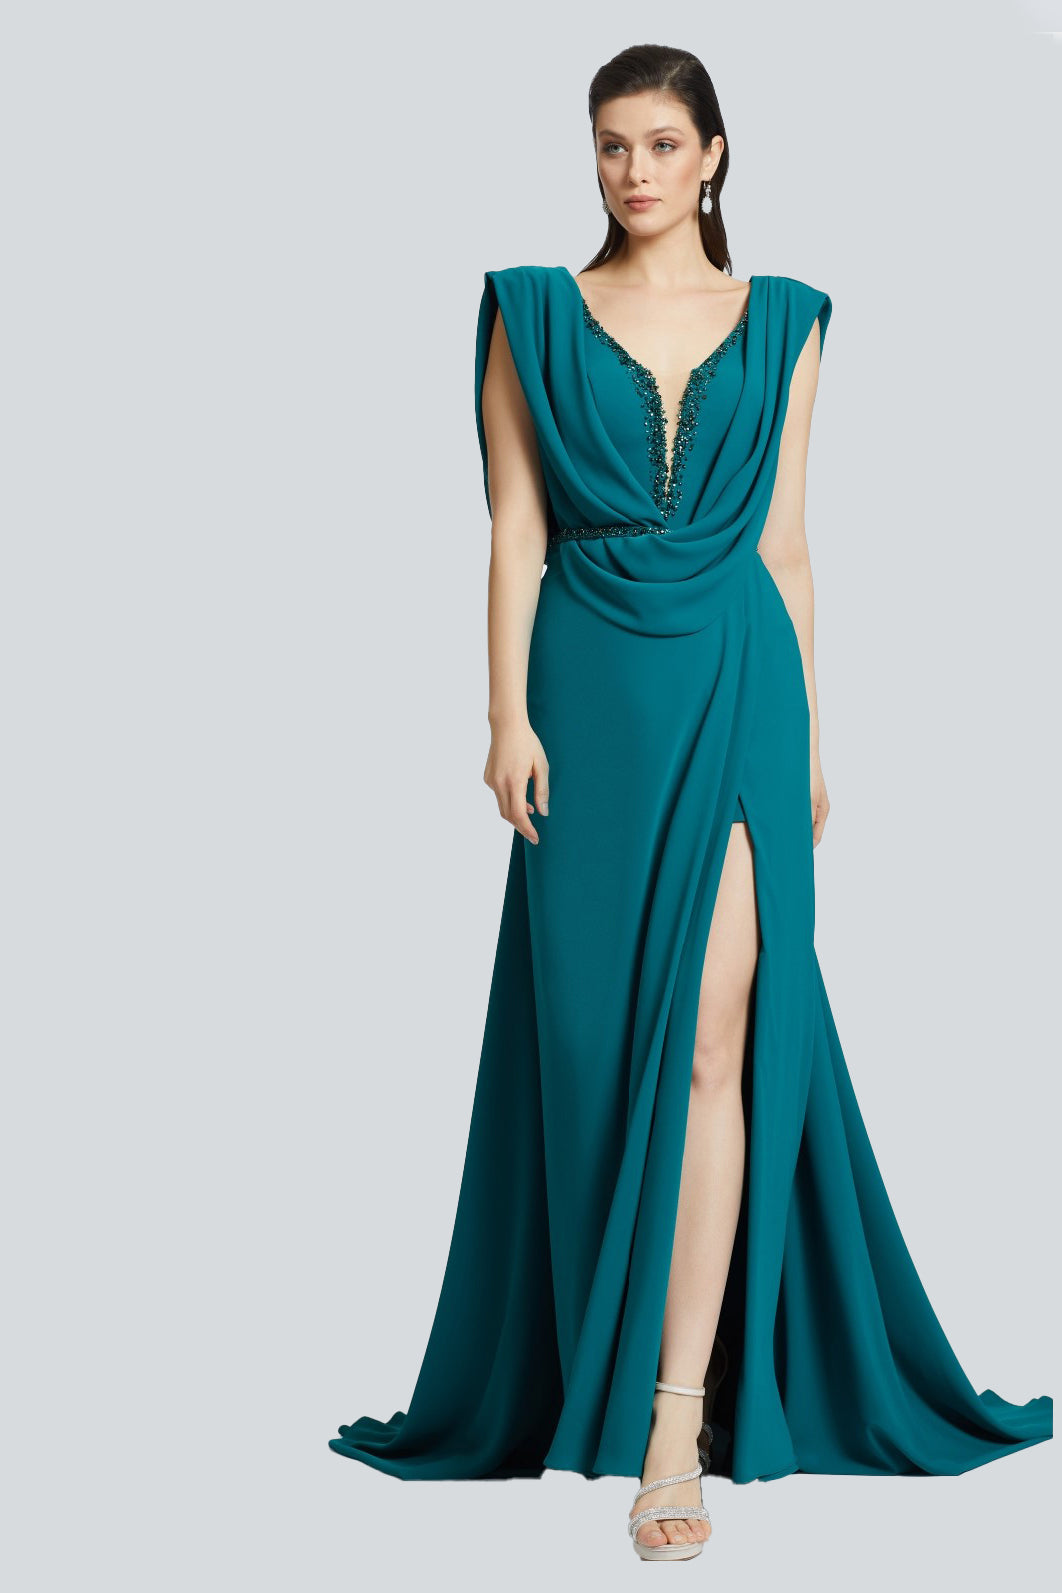 Vallery - Mystic Evenings | Evening and Prom Dresses